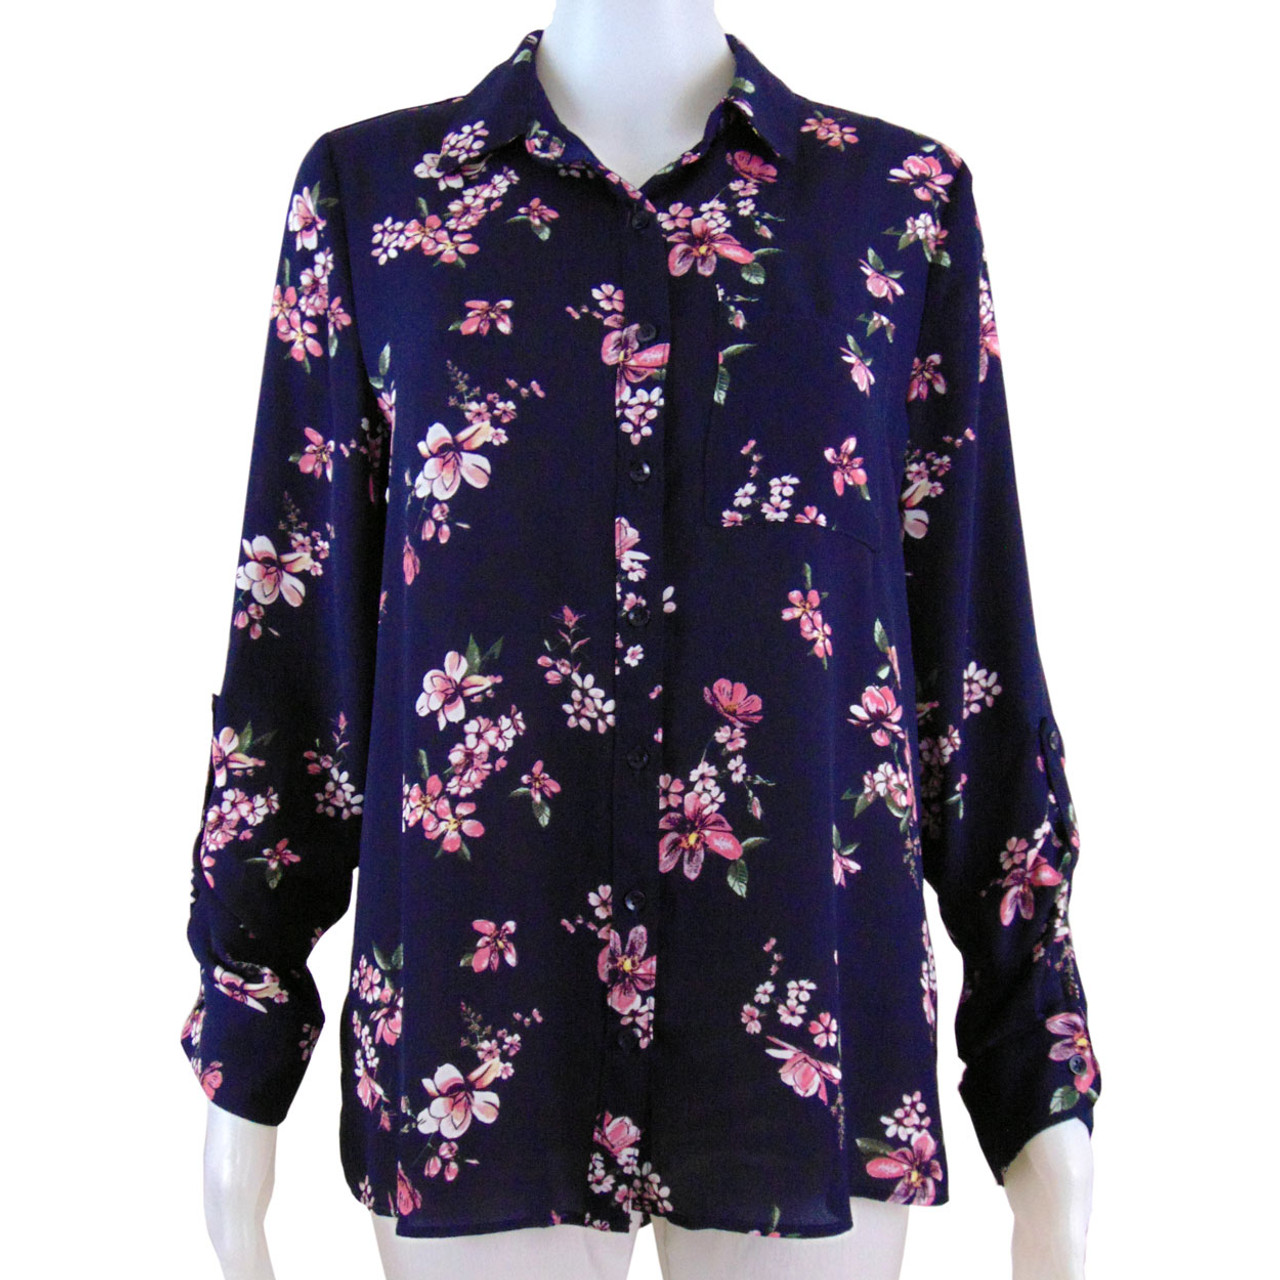 Navy Blue Button Down Floral Blouse - Size S (NEW)